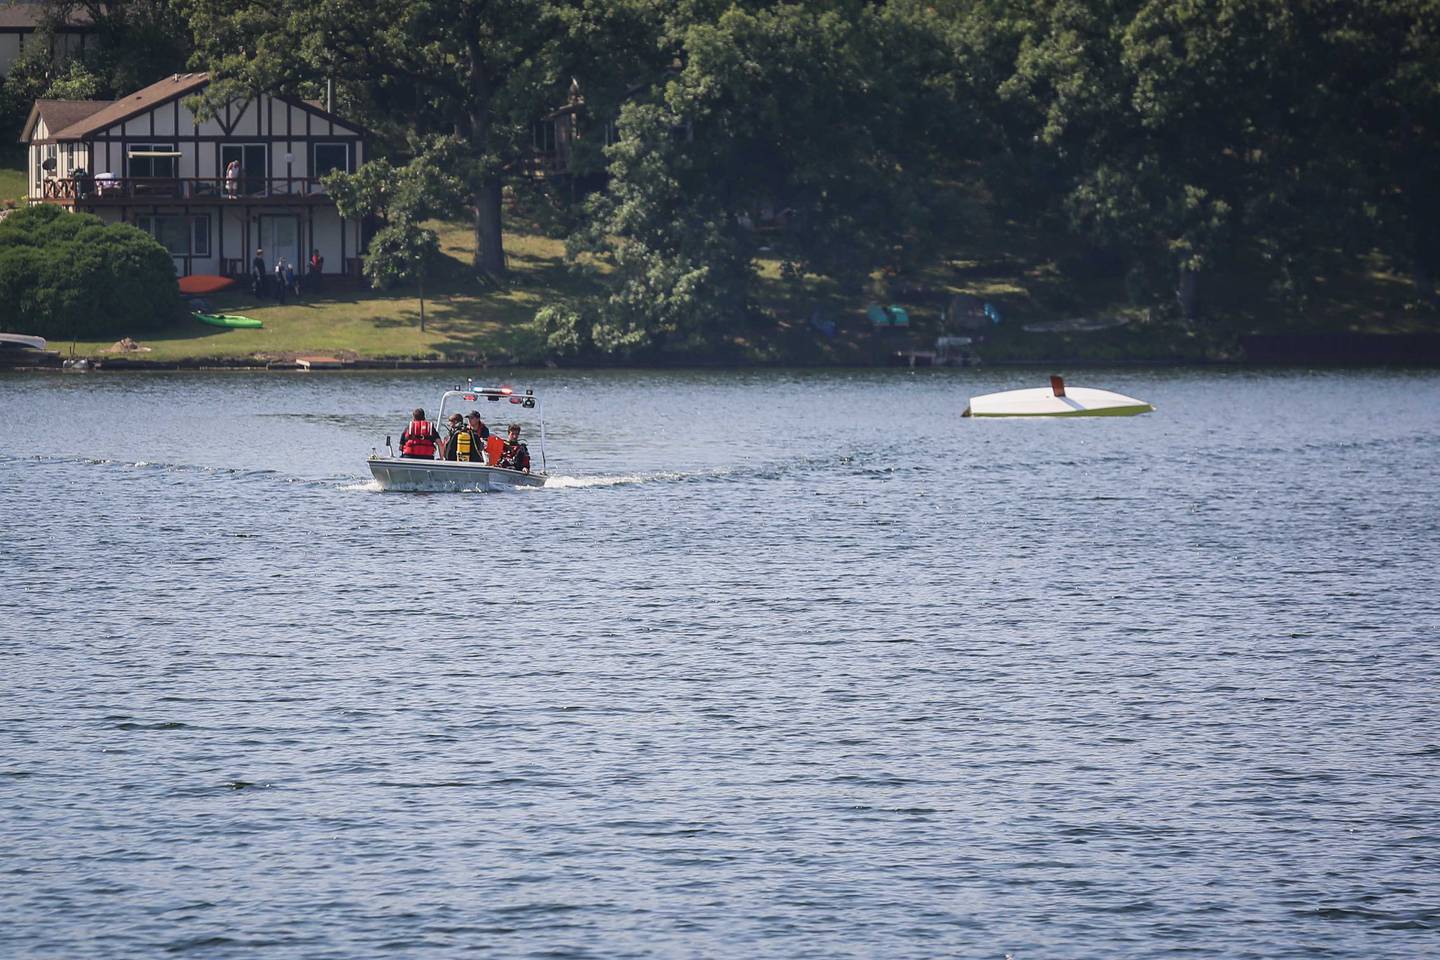 A man was rescued from Silver Lake after his sailboat tipped over on Thursday morning in Oakwood Hills.